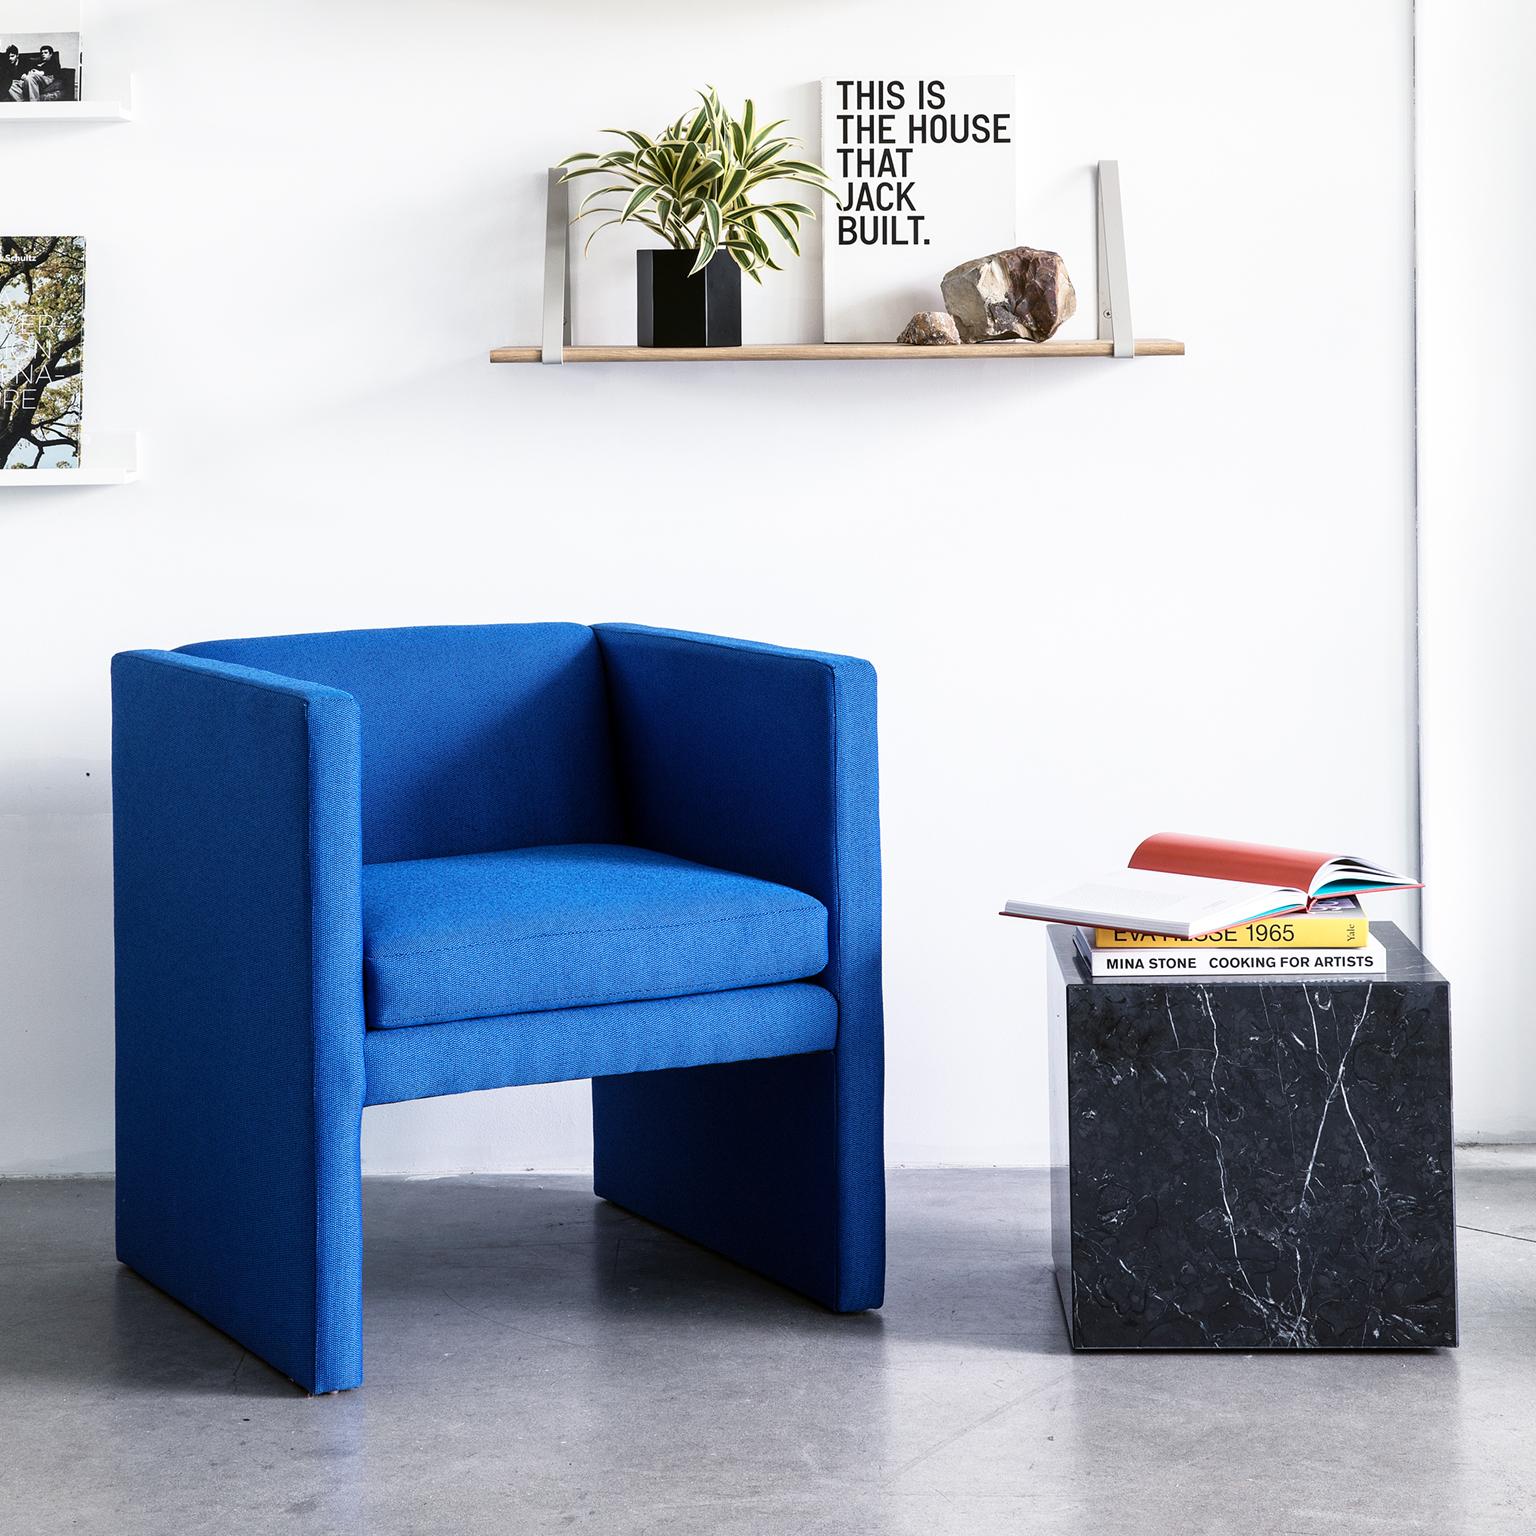 The Angle chair is a simple, sculptural statement piece. Designed in-house by TRNK, we sought out to create a chair that is comfortable, statement-making and small-space friendly by maintaining a very lean footprint. Pictured above in Ultramarine,